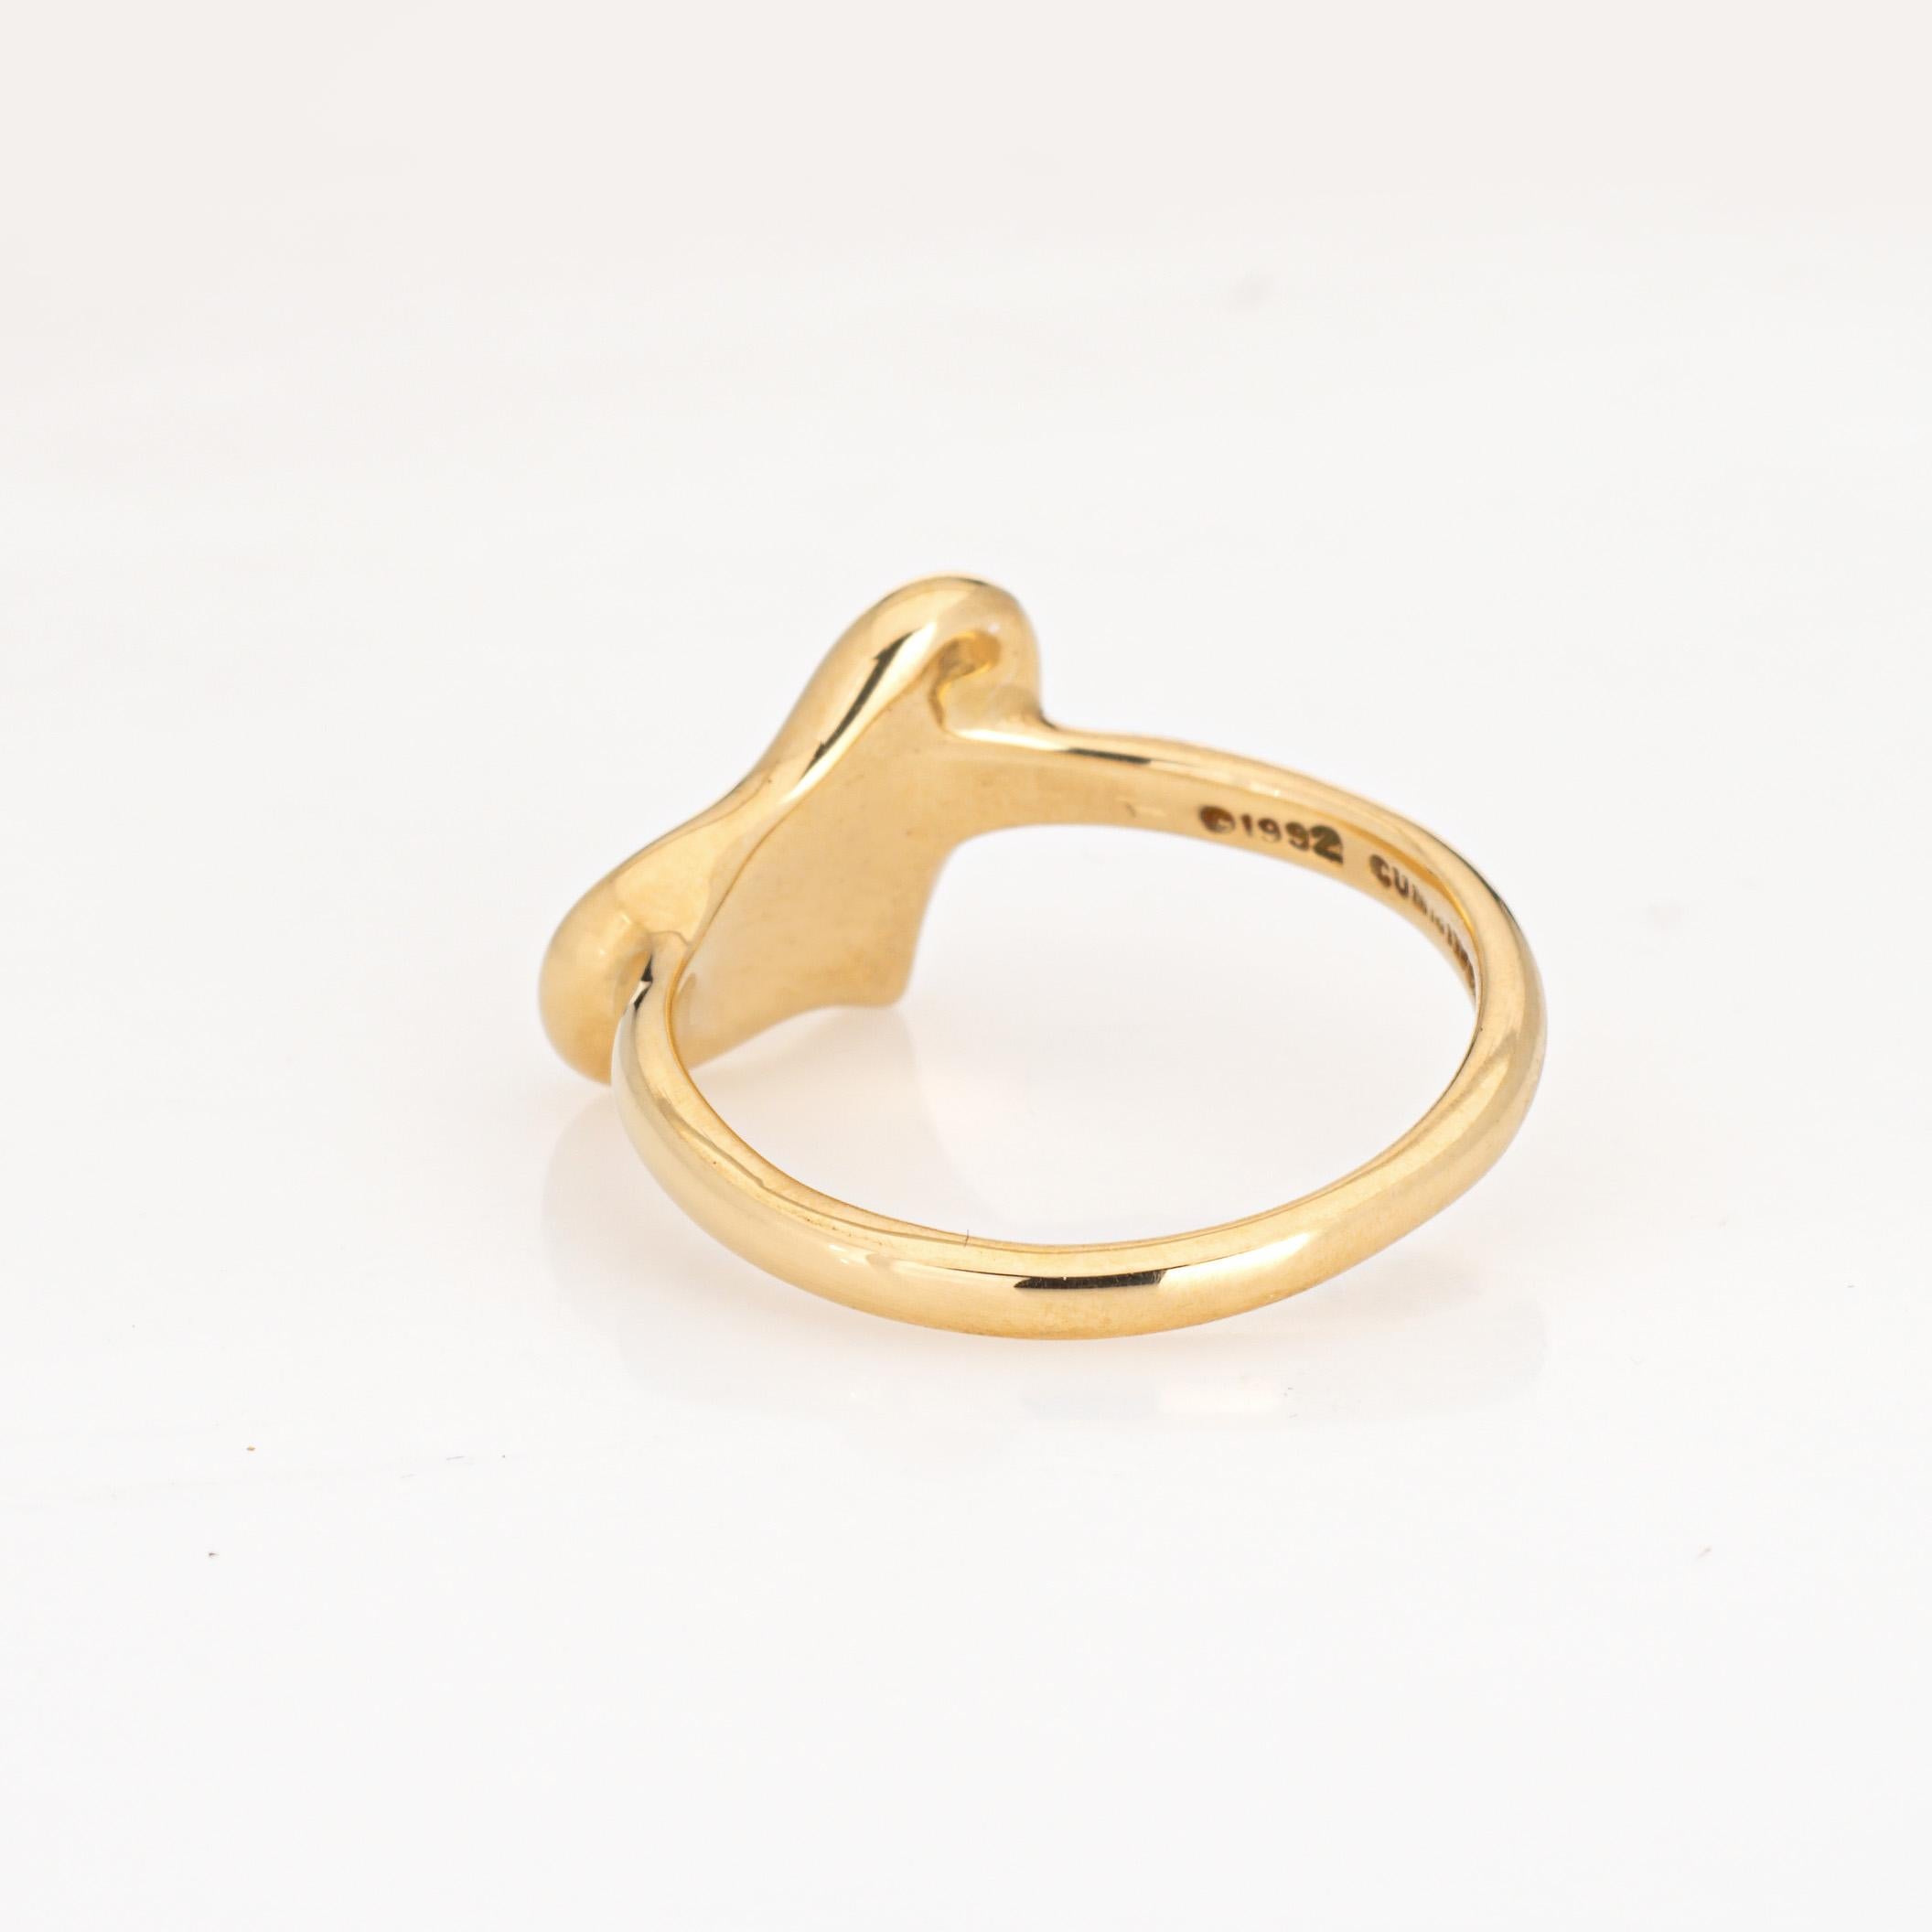 Women's c1992 Angela Cummings Heart Ring Vintage 18k Yellow Gold Sz 6.5 Signed Jewelry For Sale